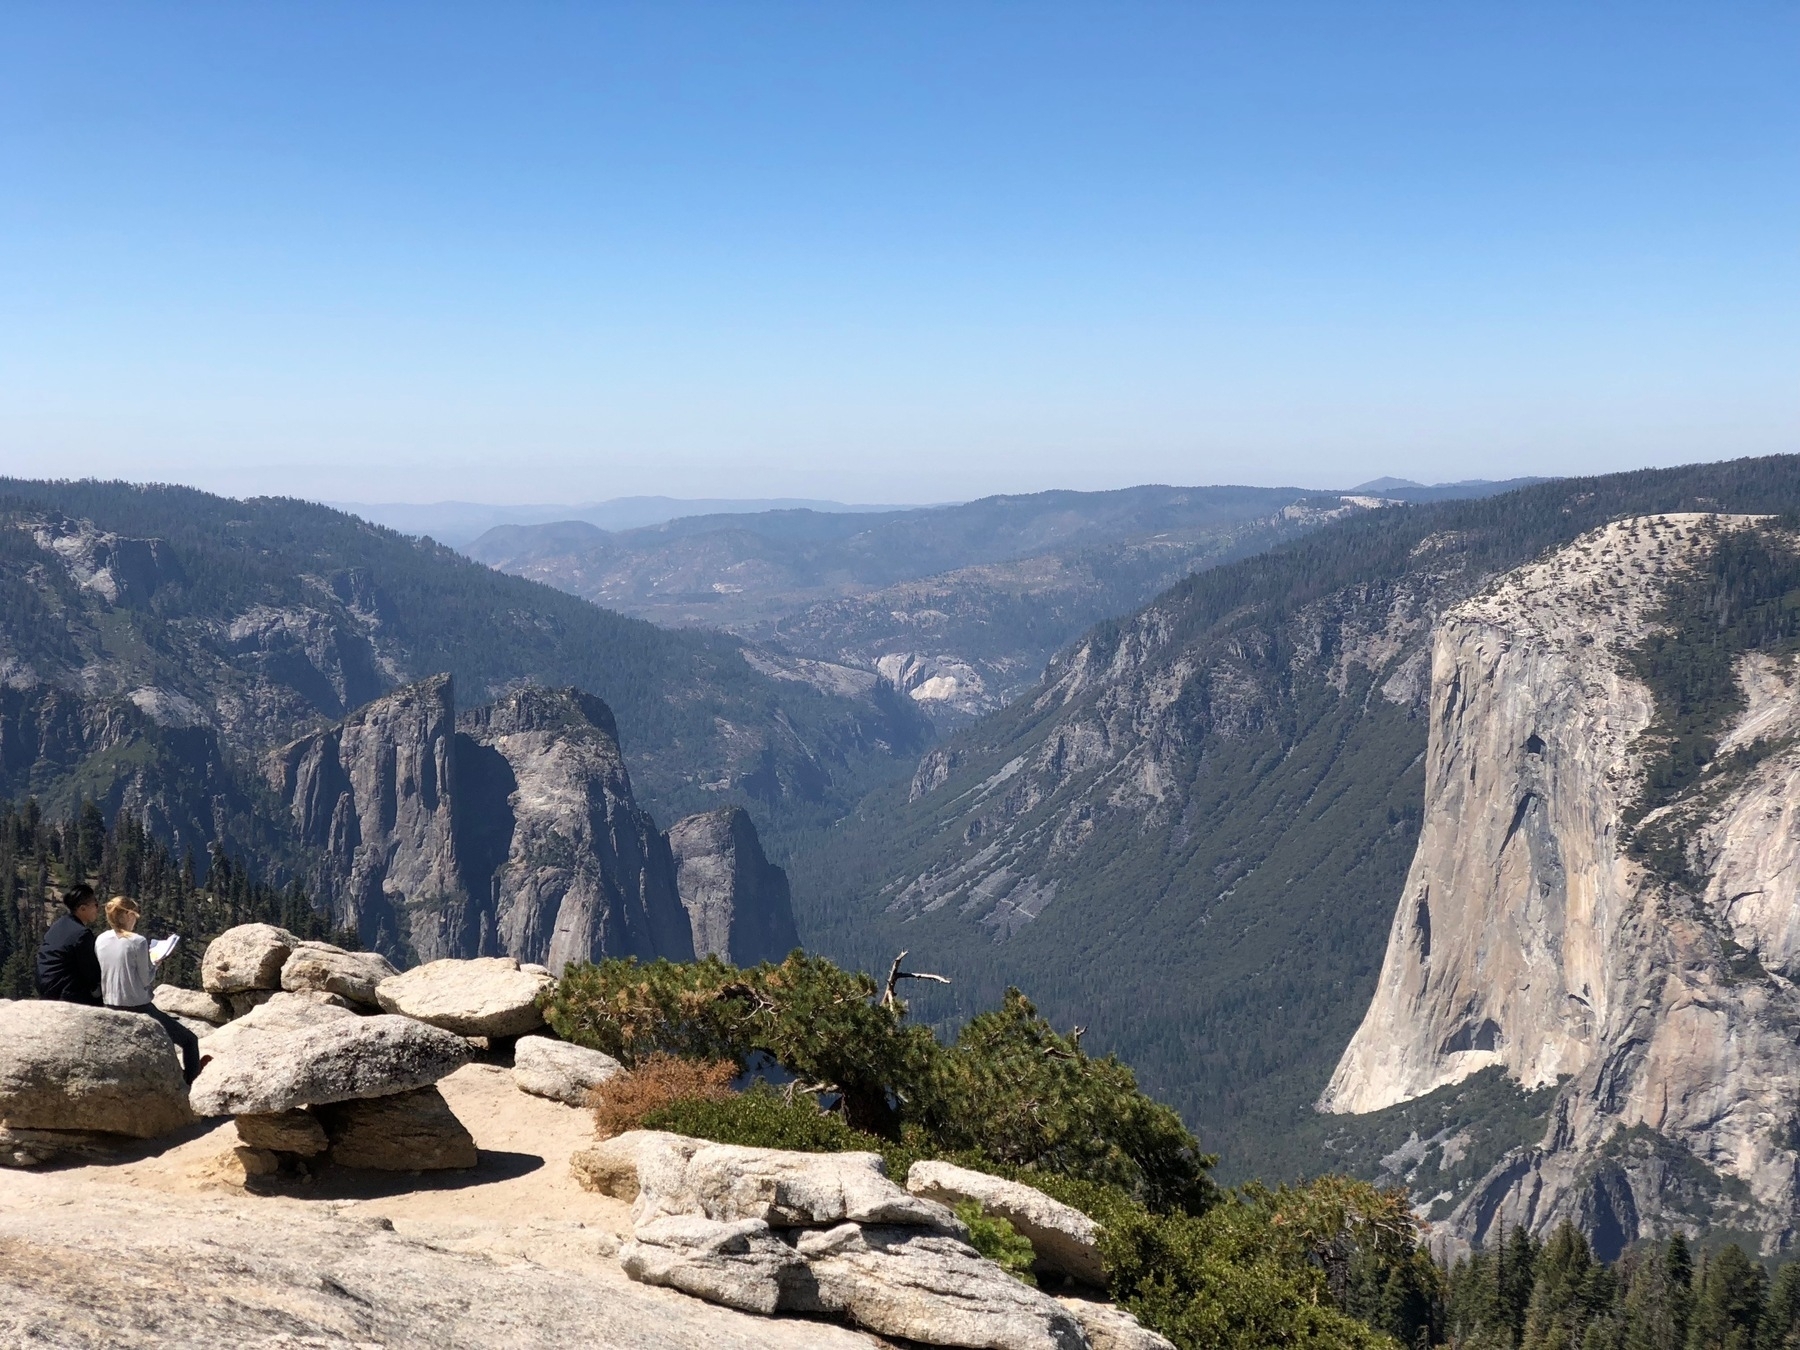 The view from Sentinel Dome